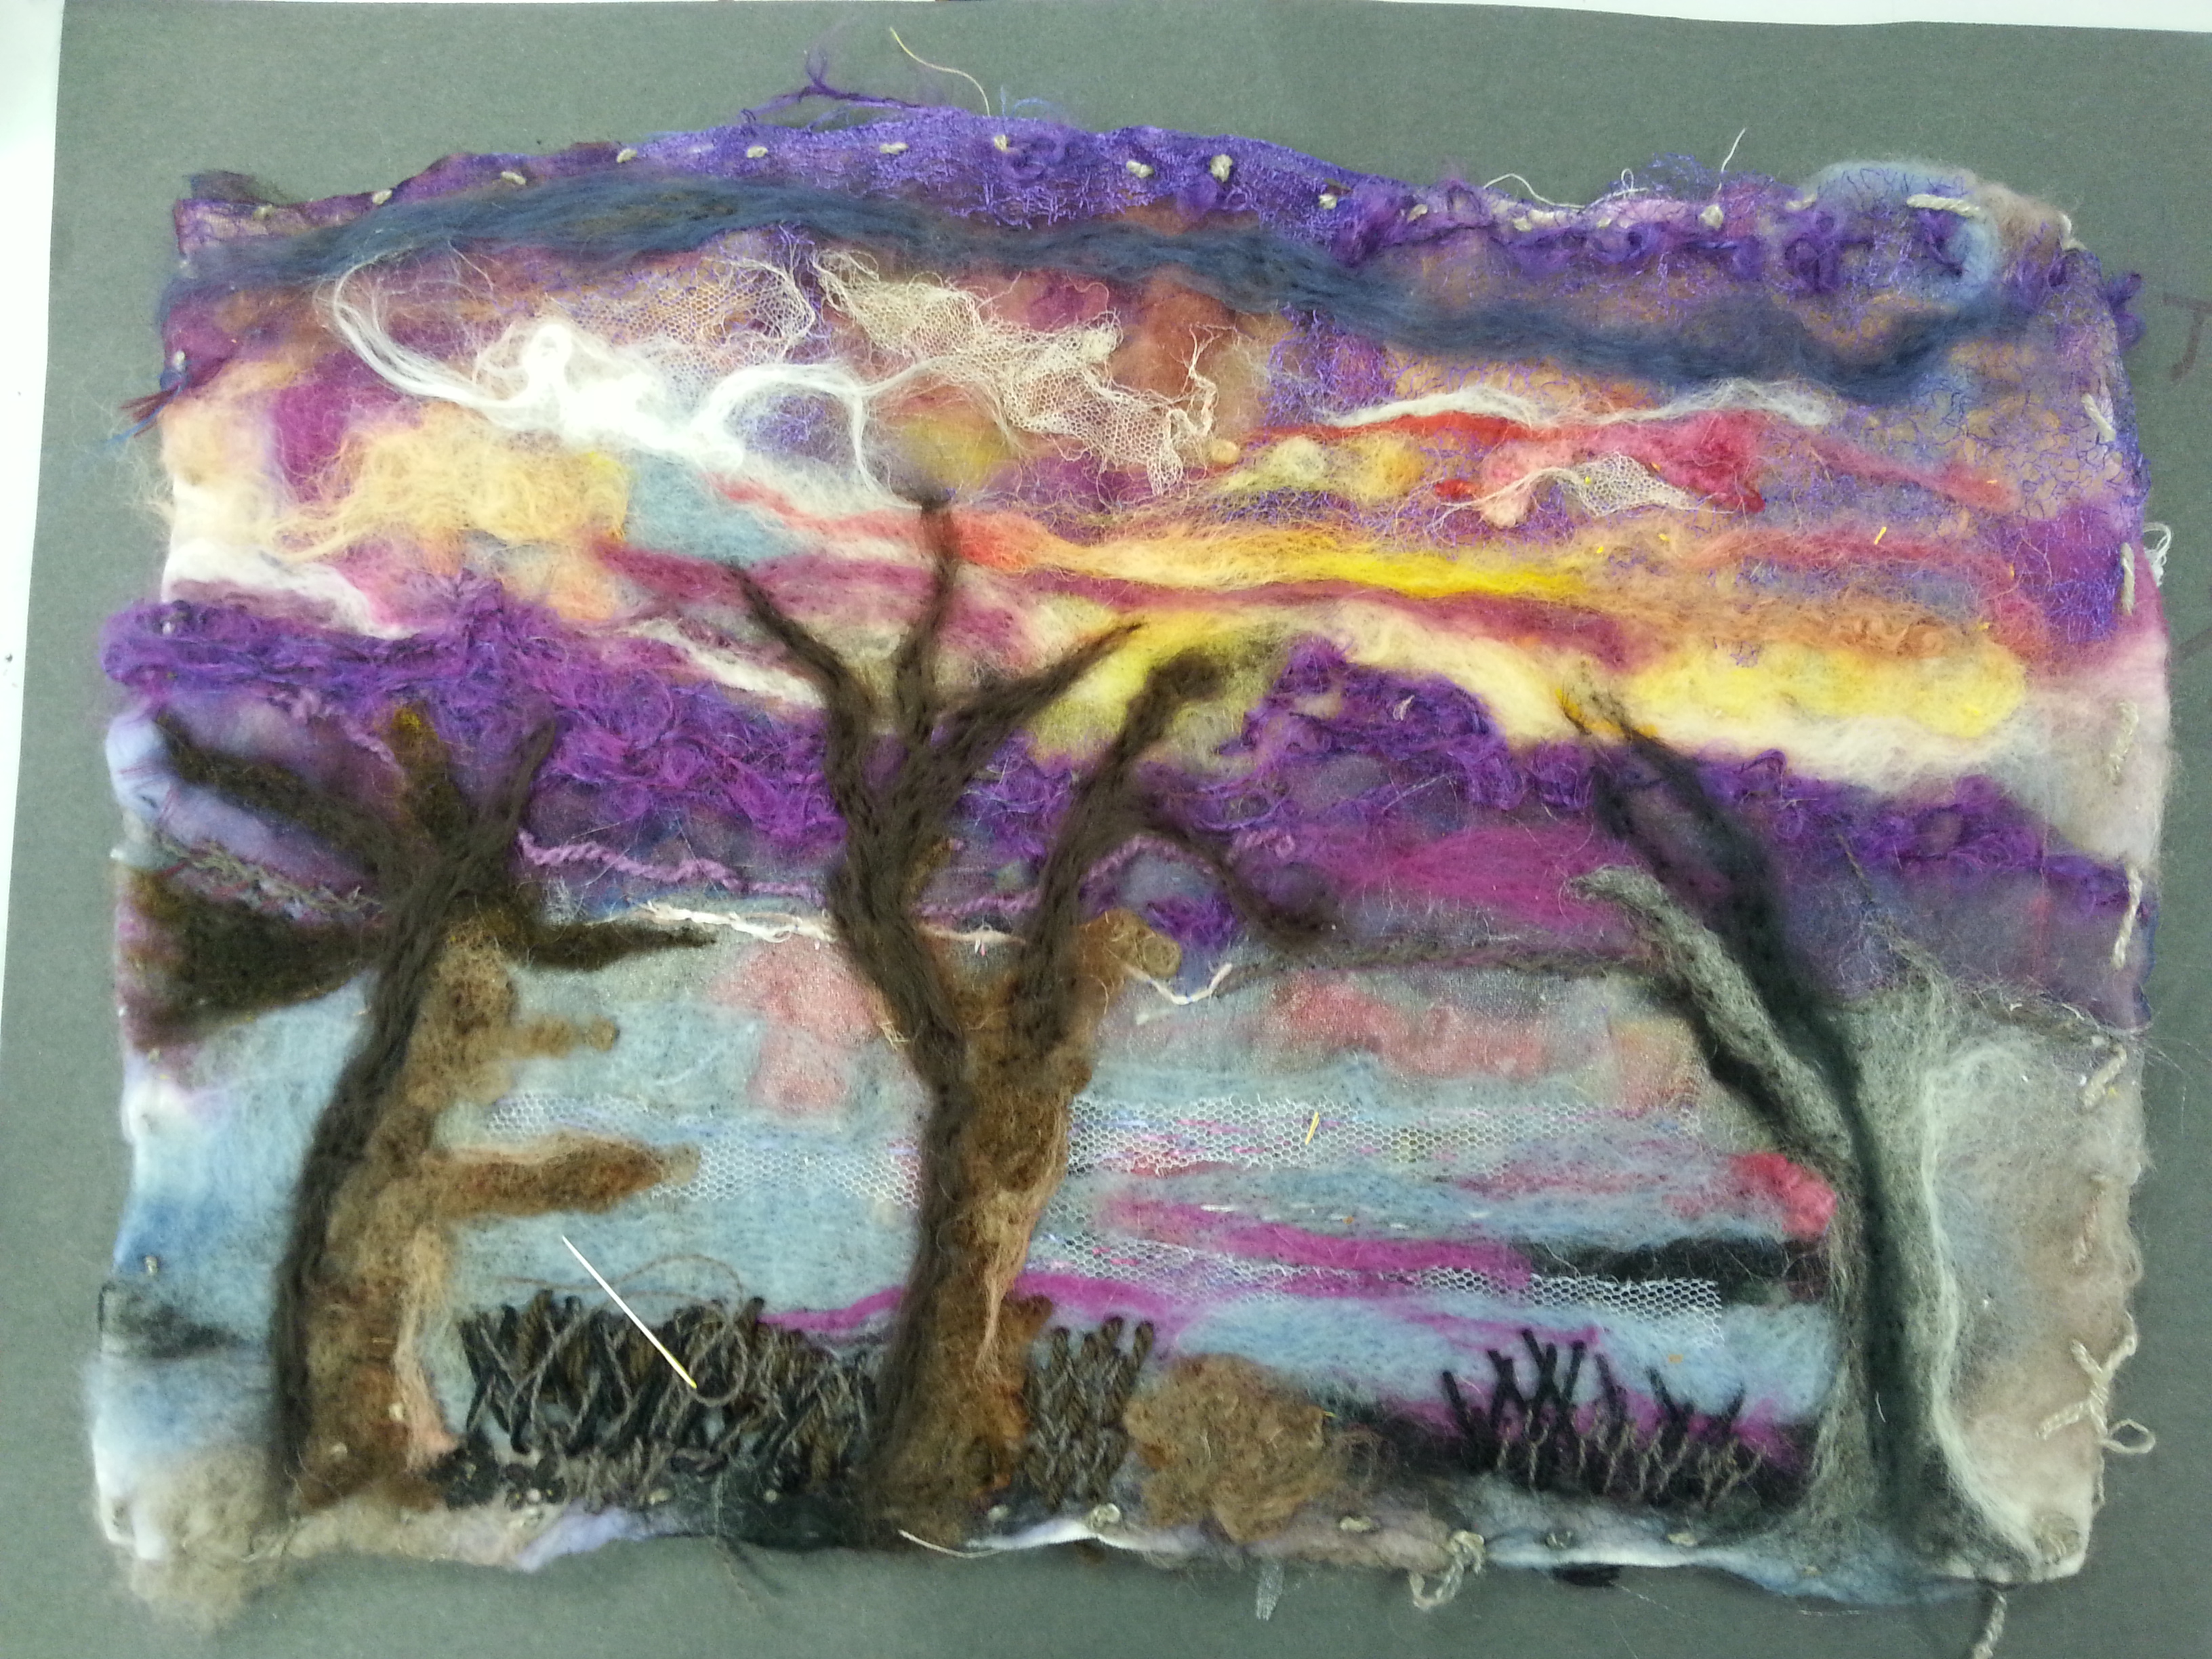 Felted landscape by a member of the Friday Textiles Group at Open Studios Altrincham with Debbie Tomkies of DT Craft & Design